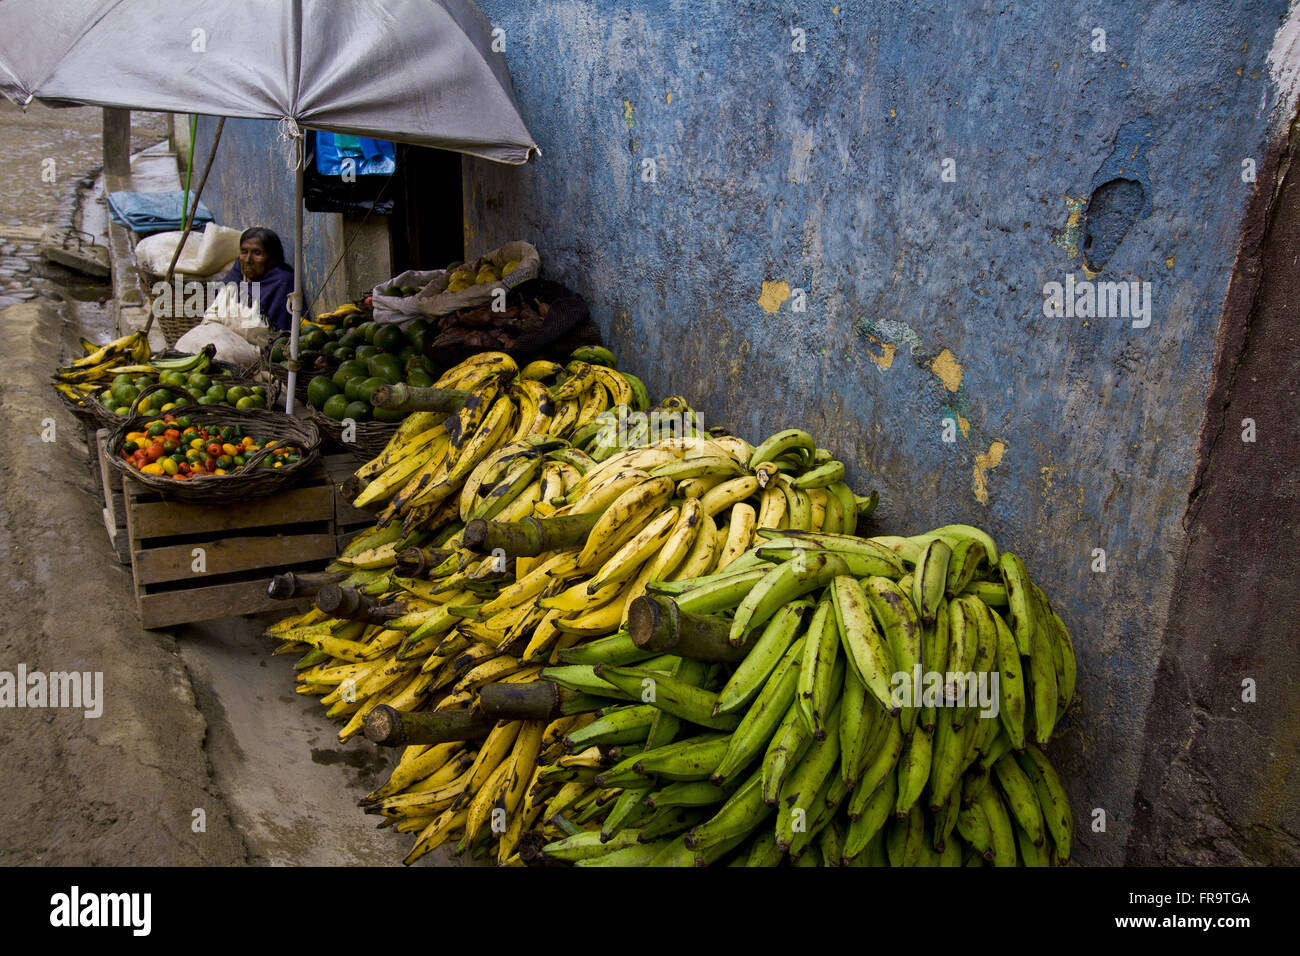 Fruits and vegetables sold by the Indians in popular markets Stock Photo